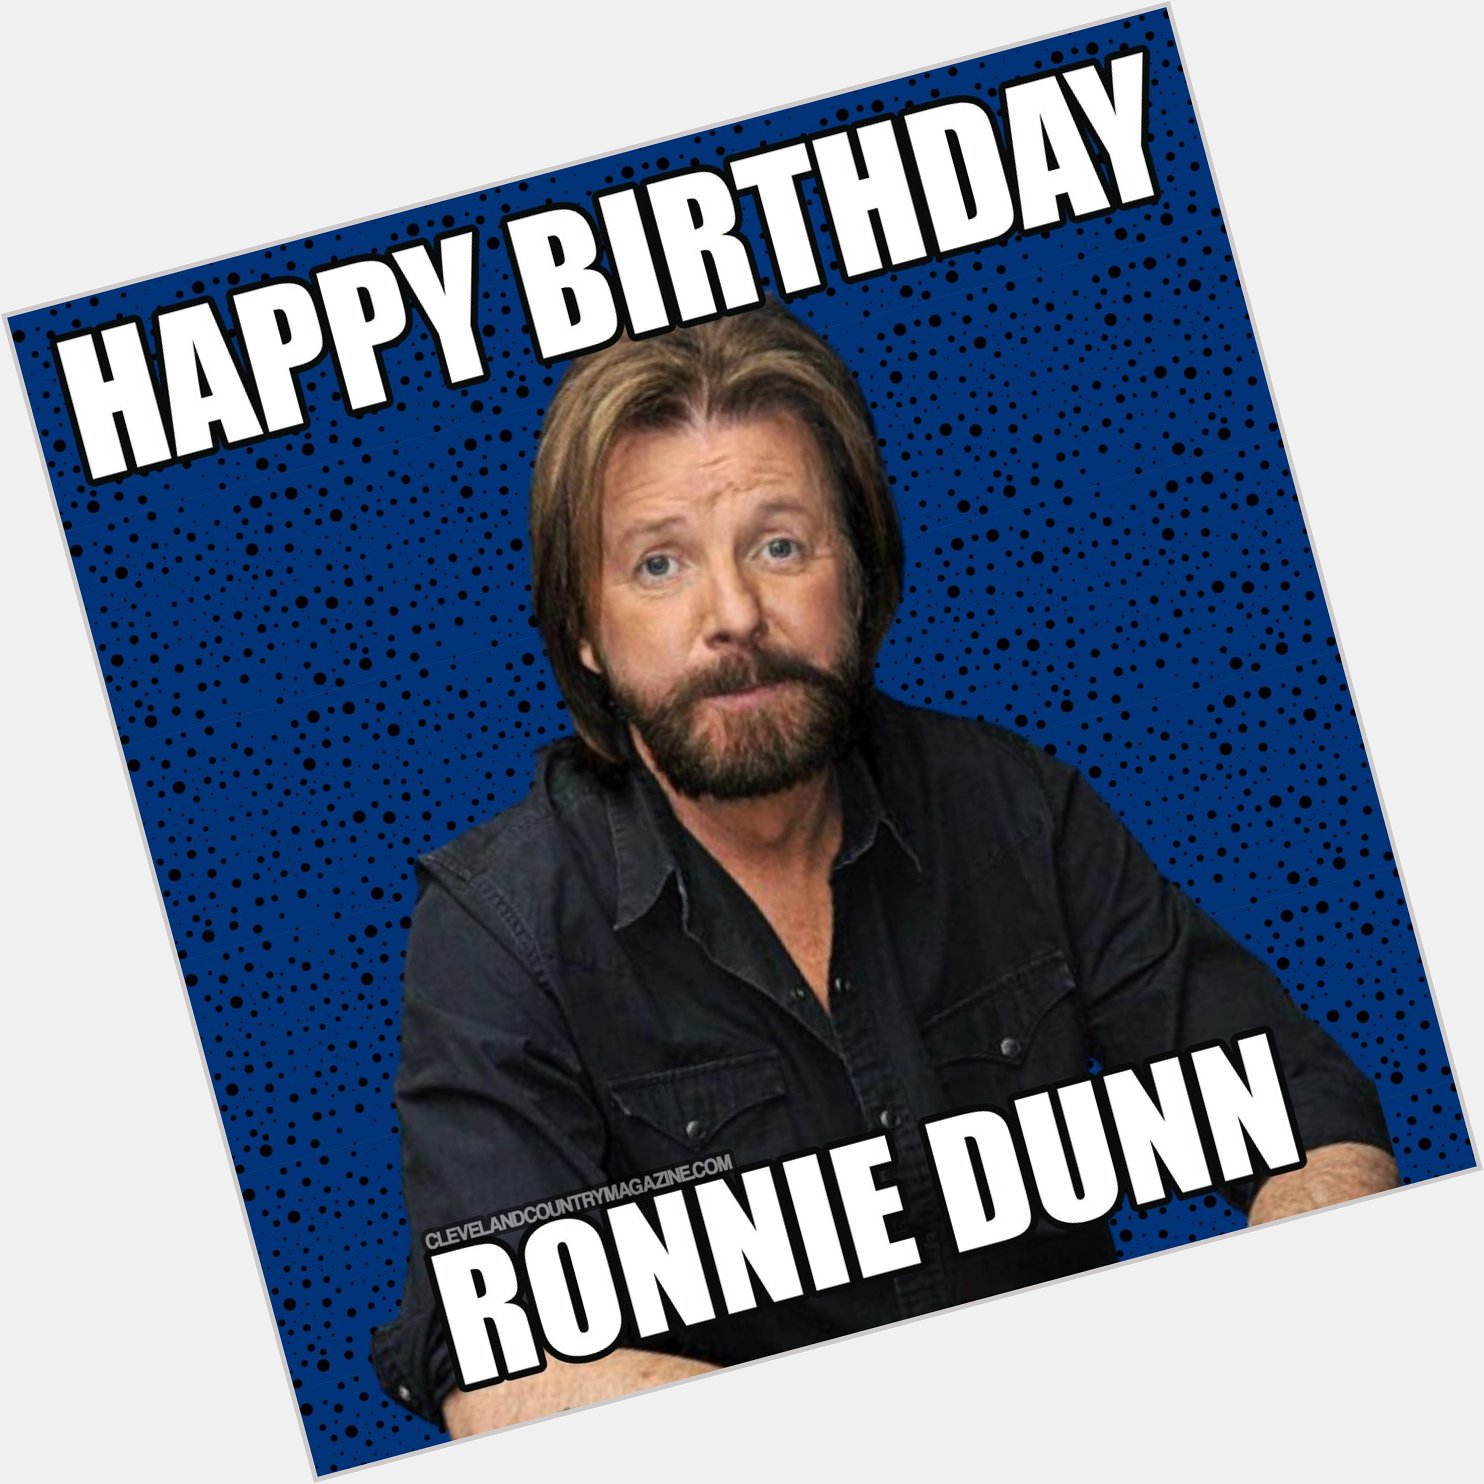 HAPPY BIRTHDAY RONNIE DUNN
Born on this day in 1953 in Coleman, Texas, was 